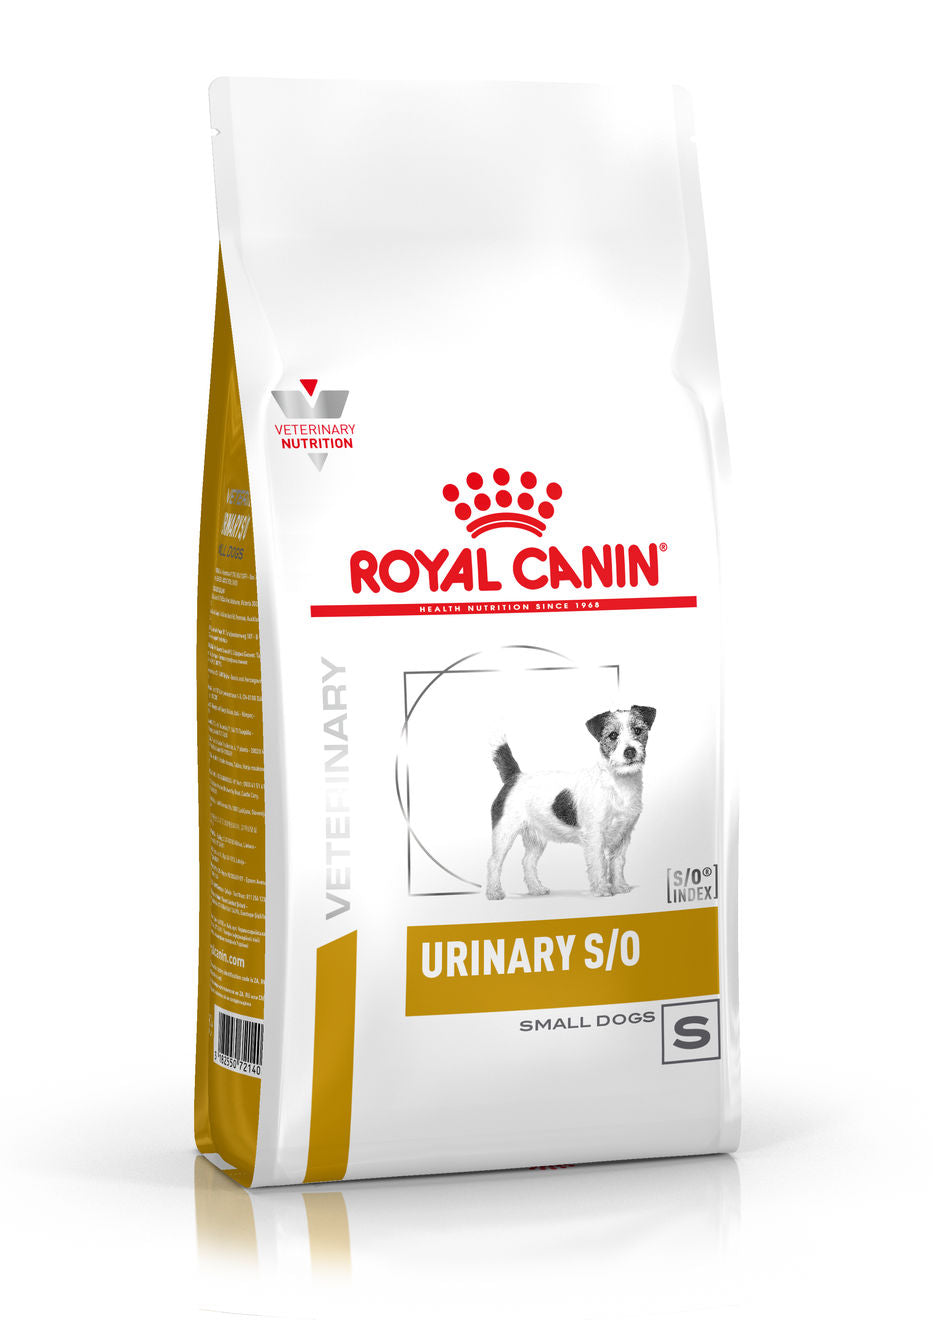 Royal Canin Urinary S/O for Small Dogs